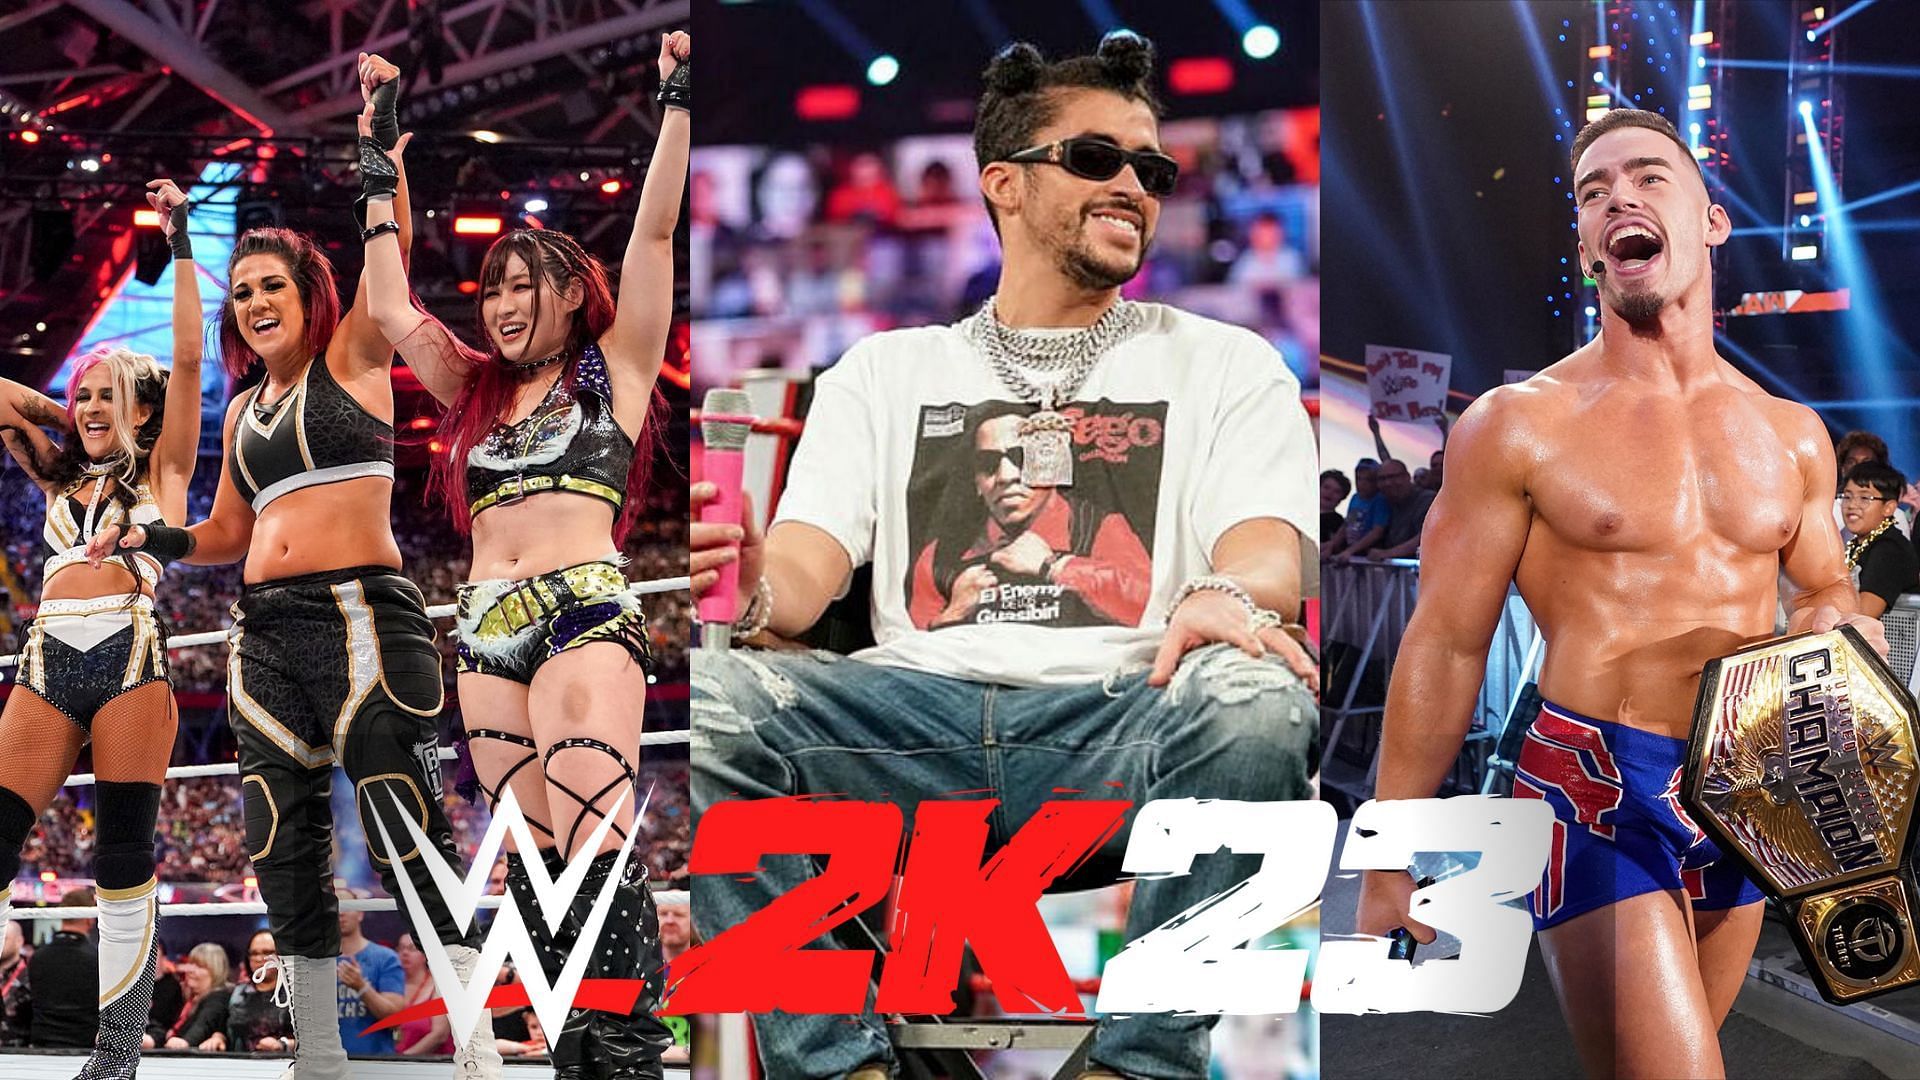 Bad Bunny tops a number of superstars at the WWE 2K23 ratings